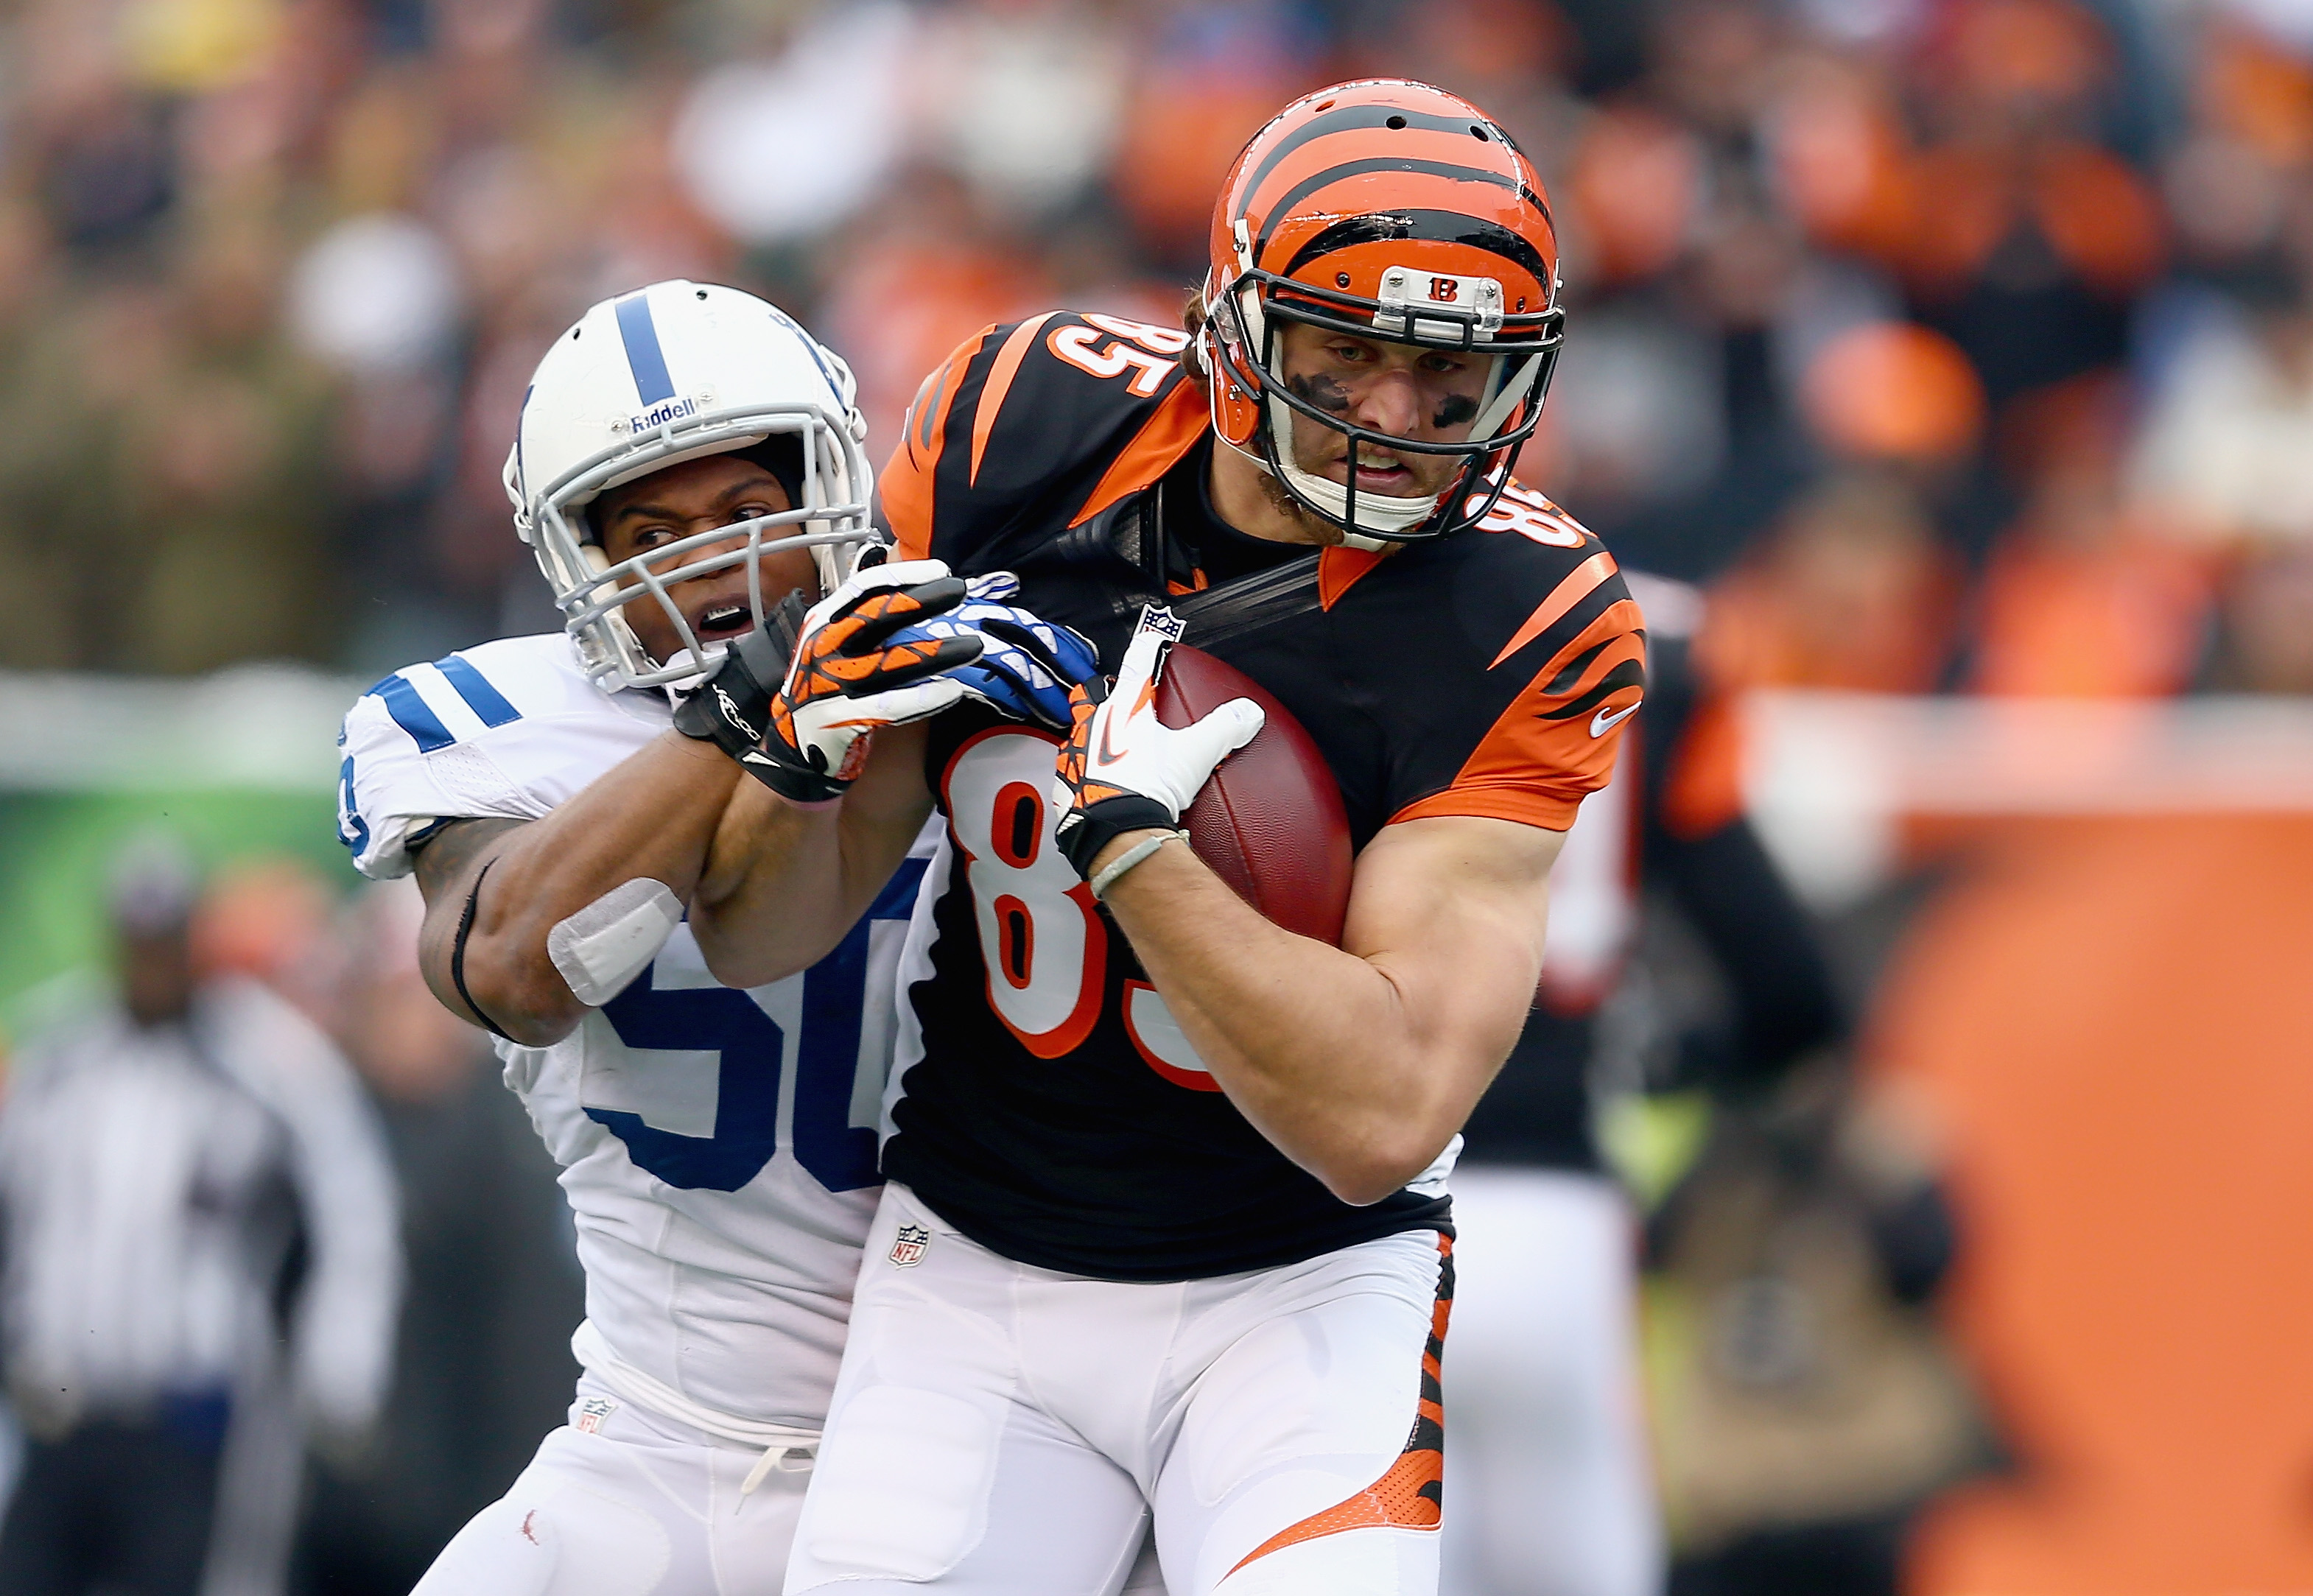 Now the starting TE, Eifert hasn't played a full game since 2013 (Getty).